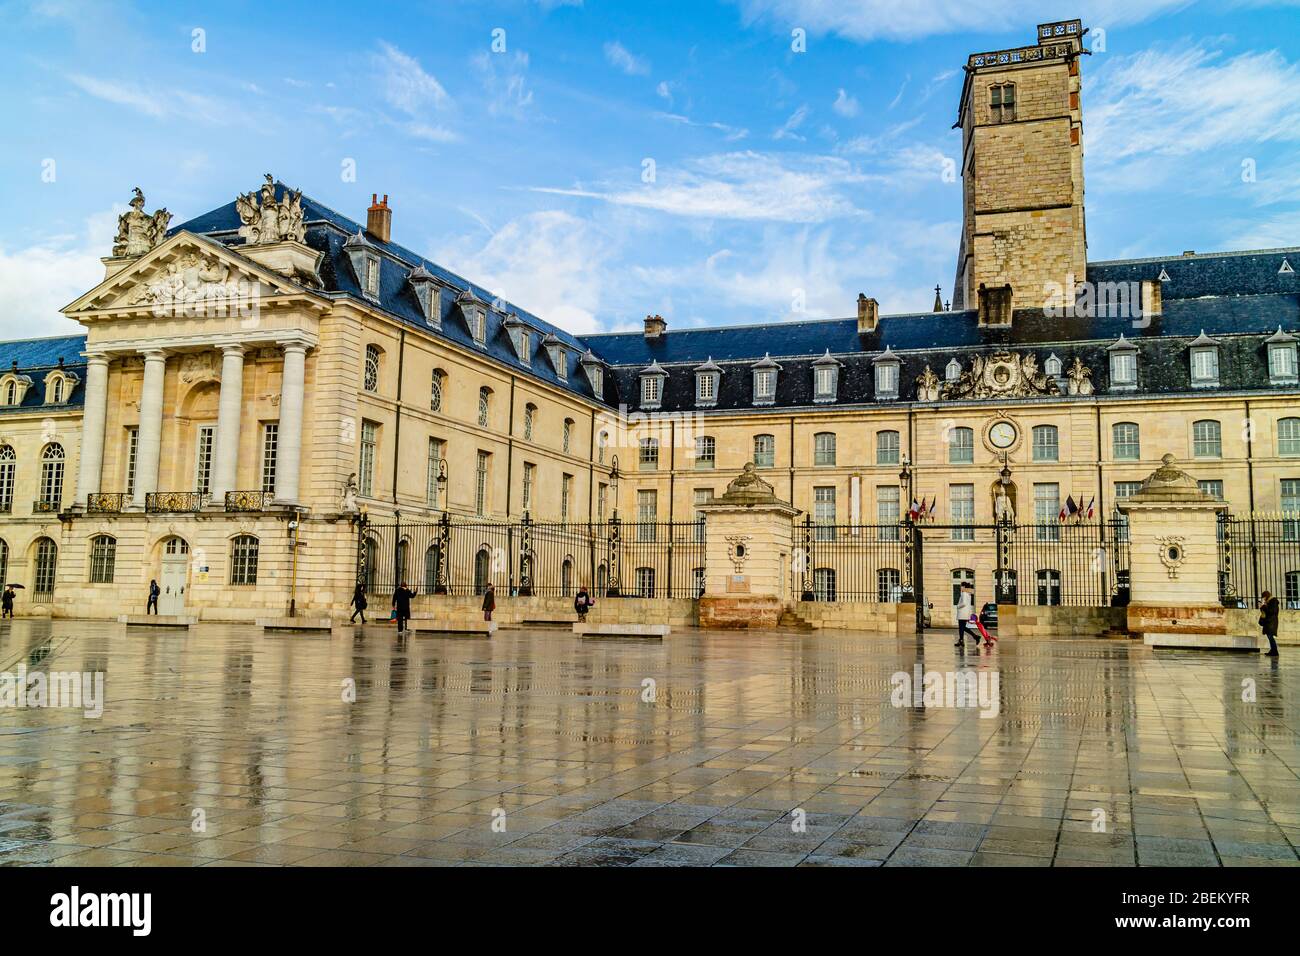 Palace of the Dukes, with the 15th century tower of Philippe le Bon, from the Place de la Libération in city centre of Dijon, France. February 2020. Stock Photo